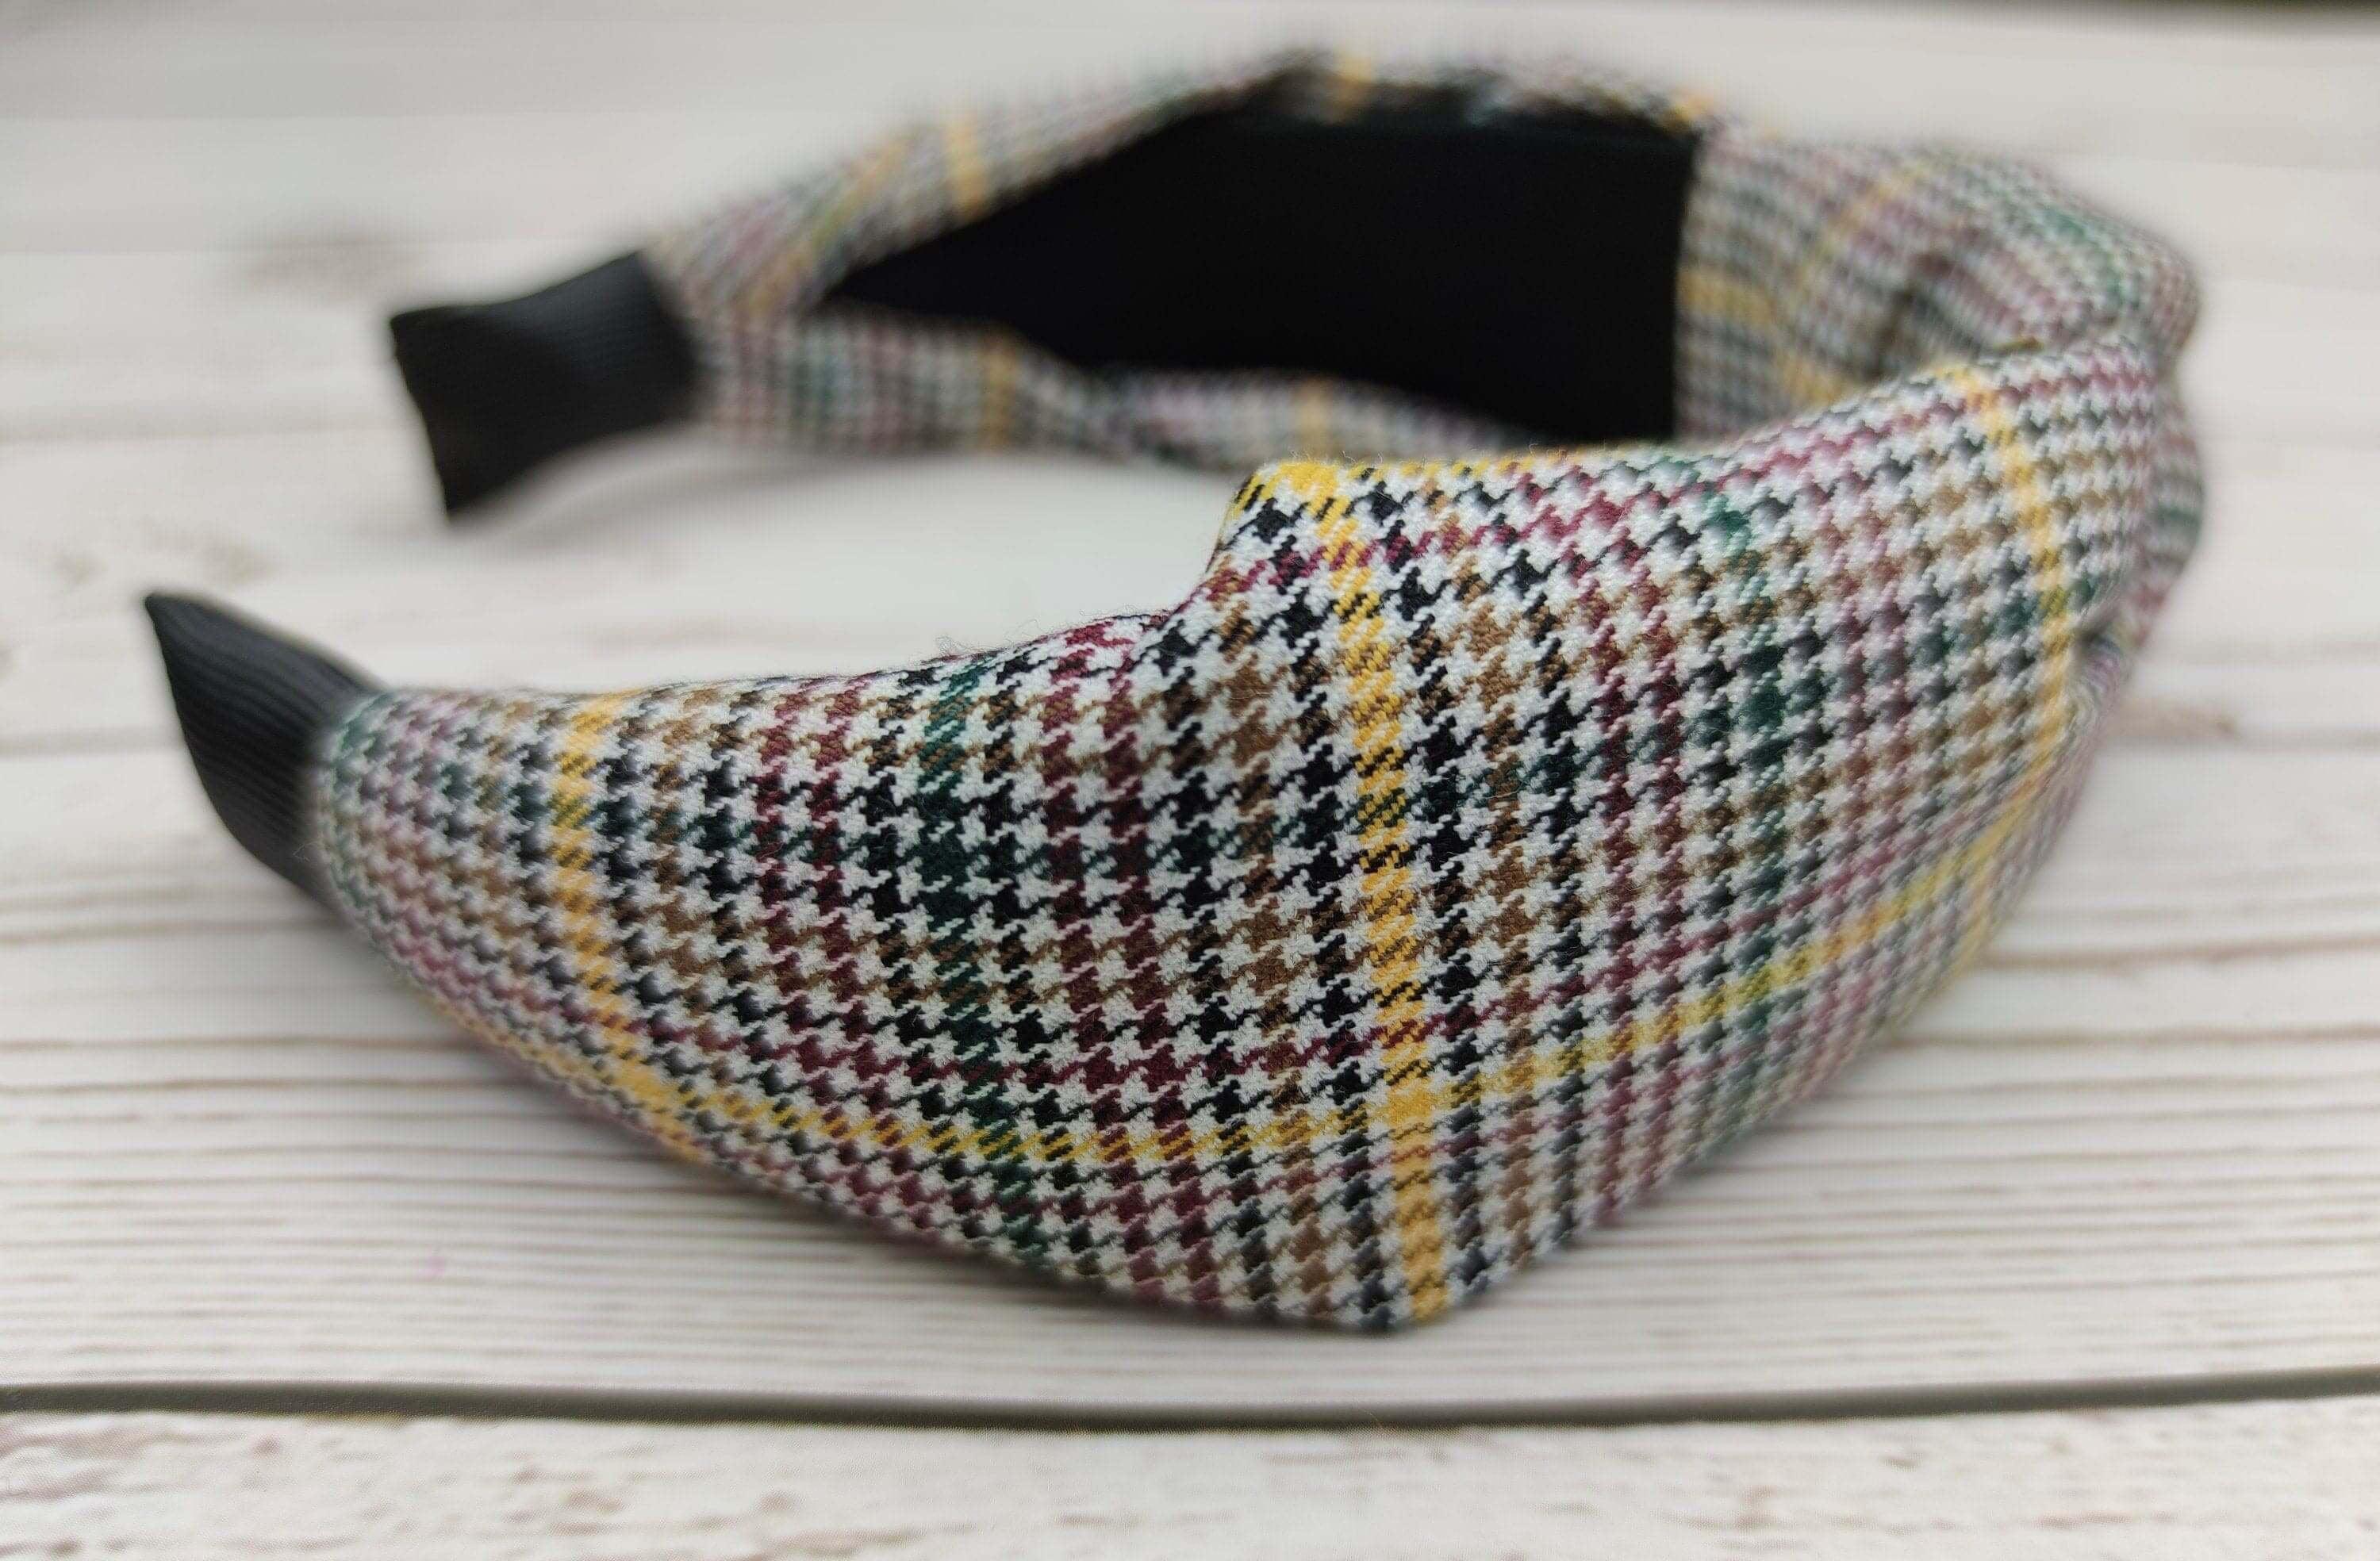 Elegant White and Black Crepe Knotted Headband - Classic, Fashionable Houndstooth Hair Accessory for College with Yellow, Green and Brown Stripes available at Moyoni Design